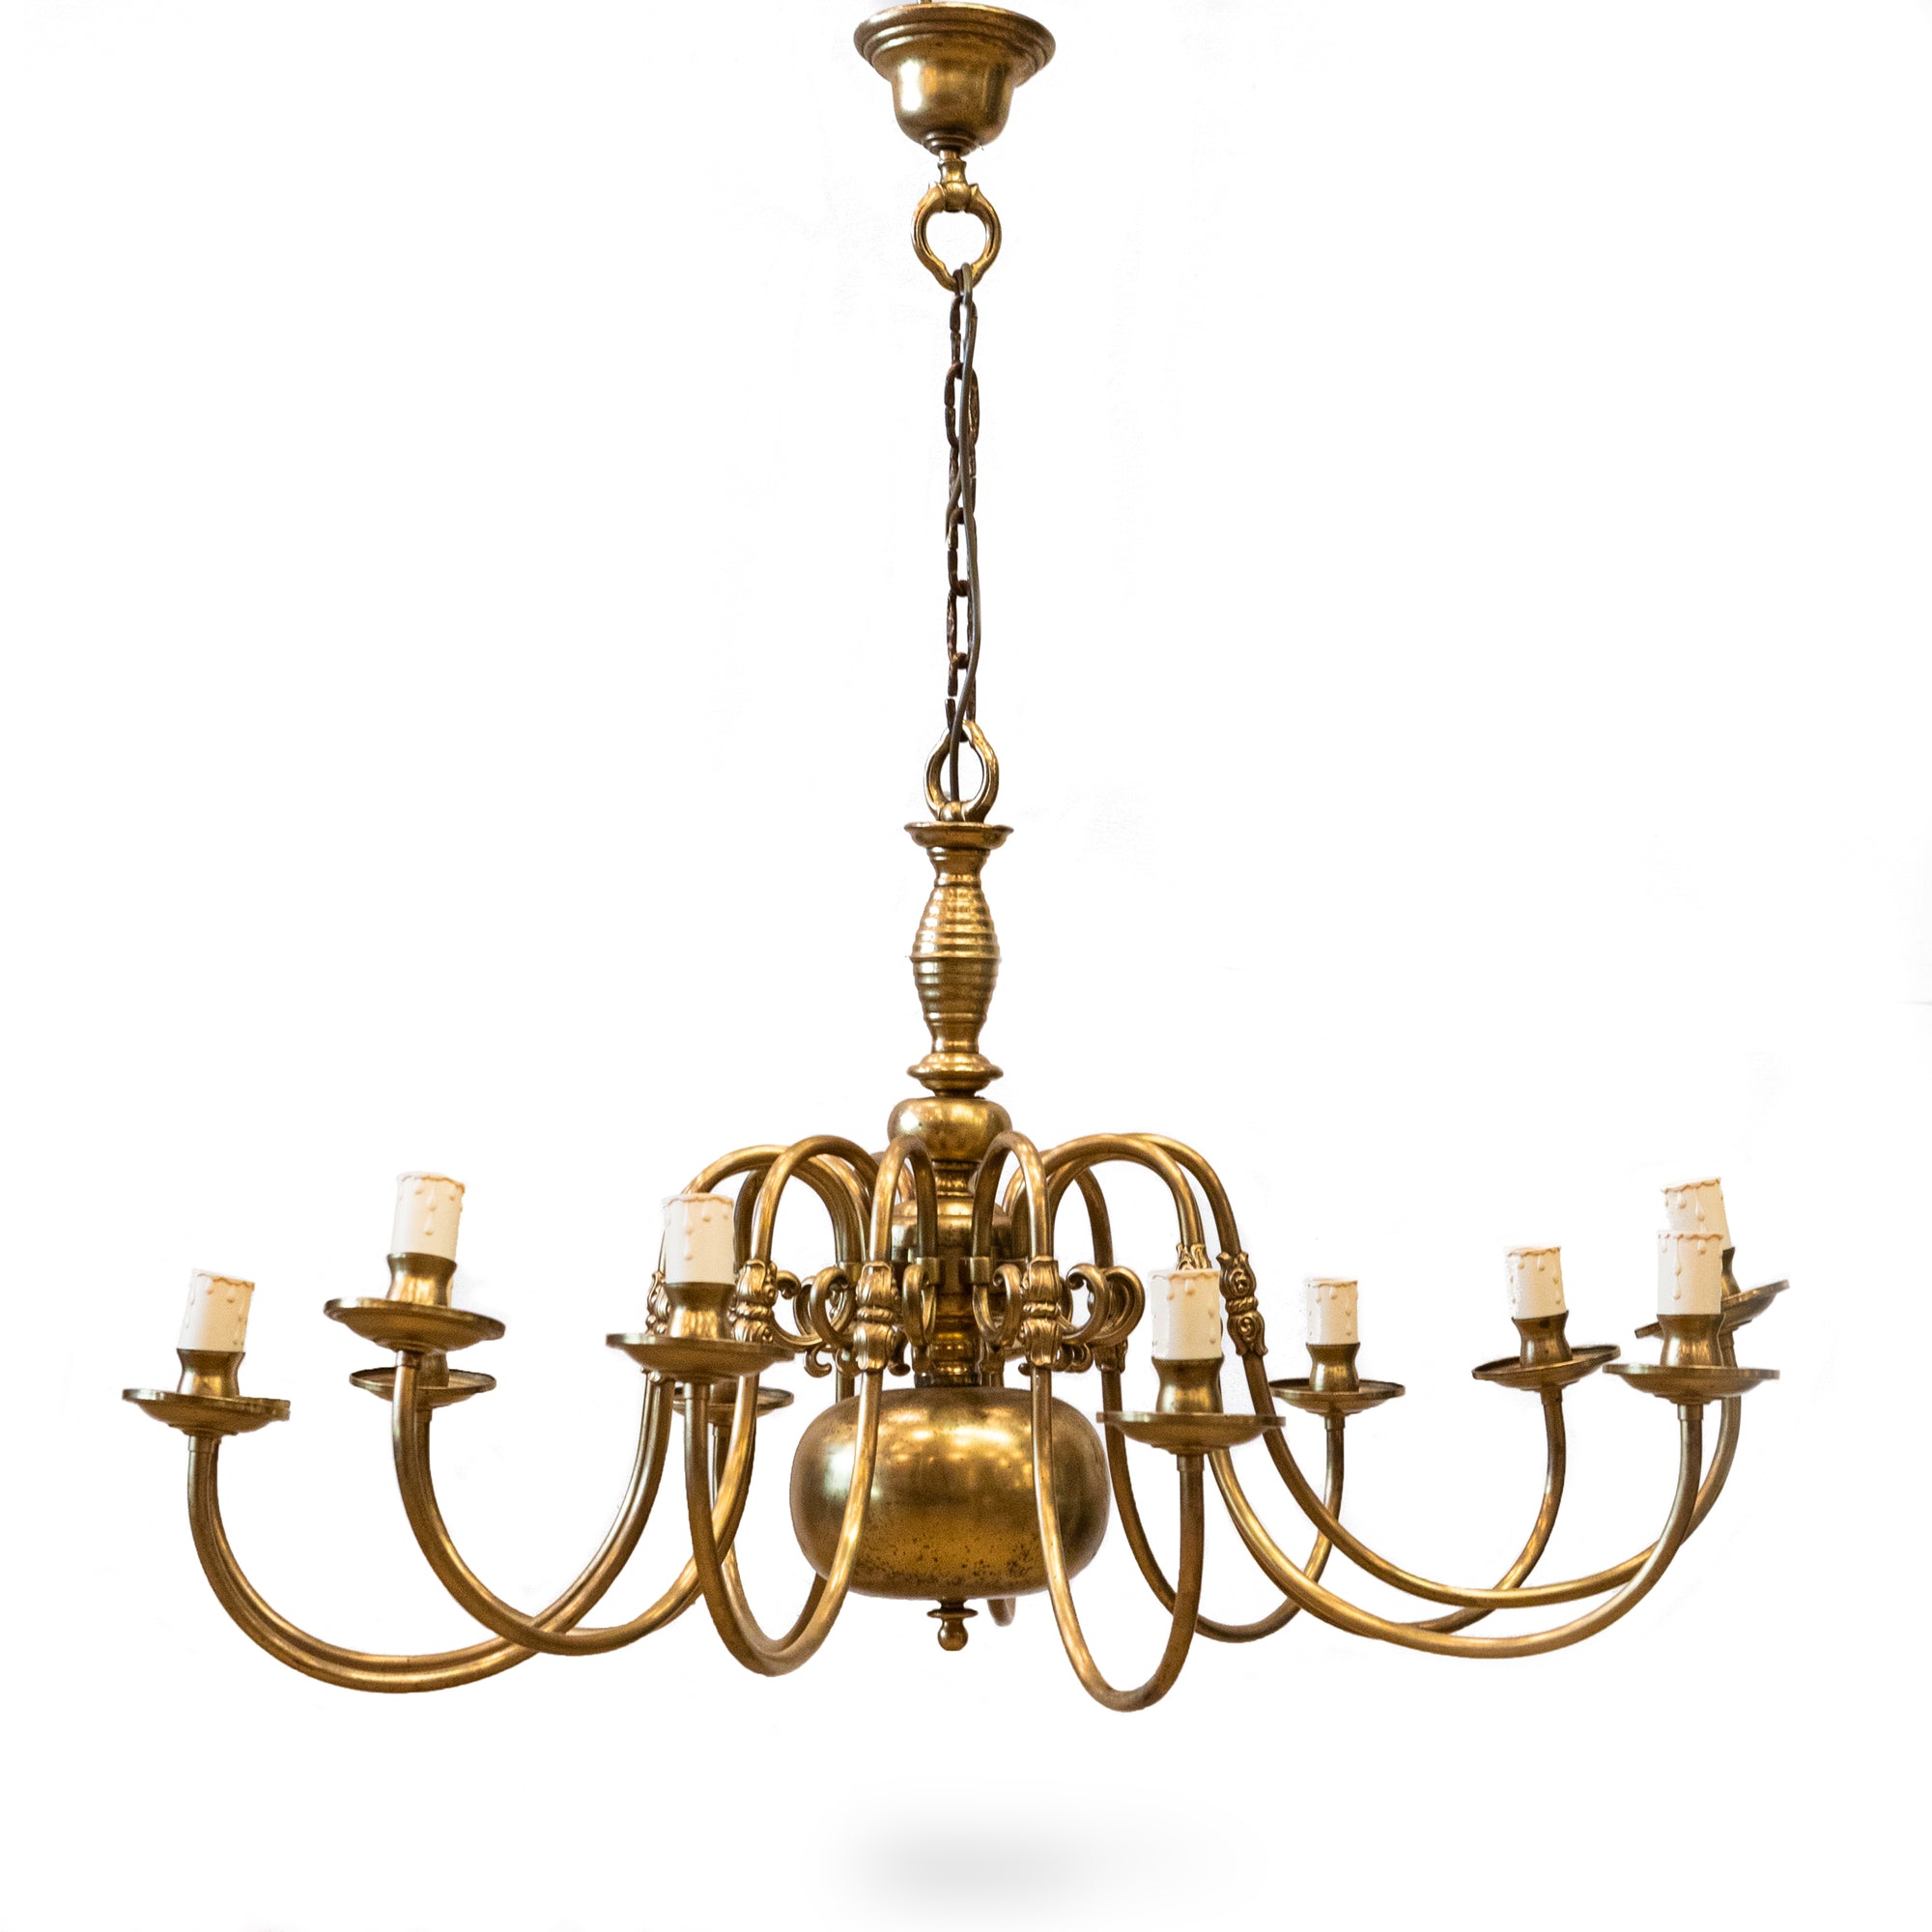 Reclaimed Large Brass Chandelier | 12 Arm | The Architectural Forum